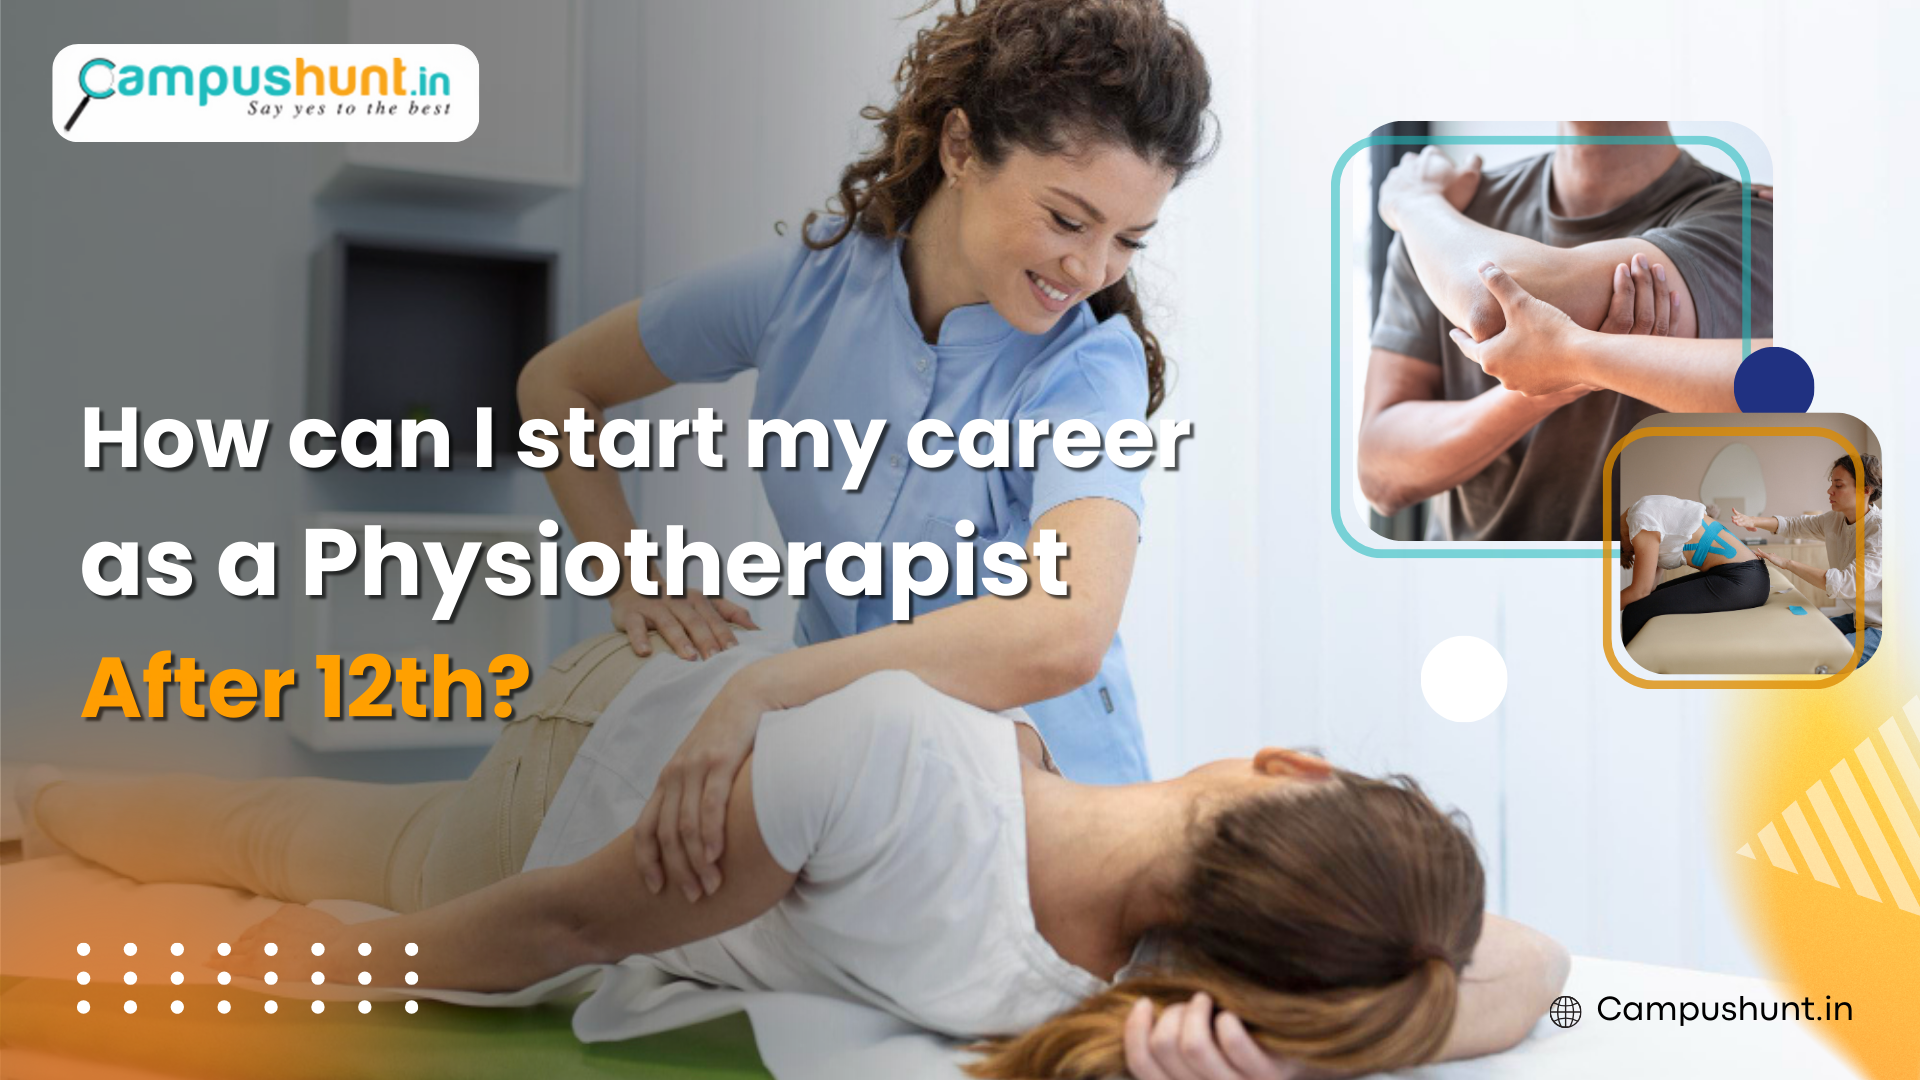 How can I start my career as a Physiotherapist after 12th